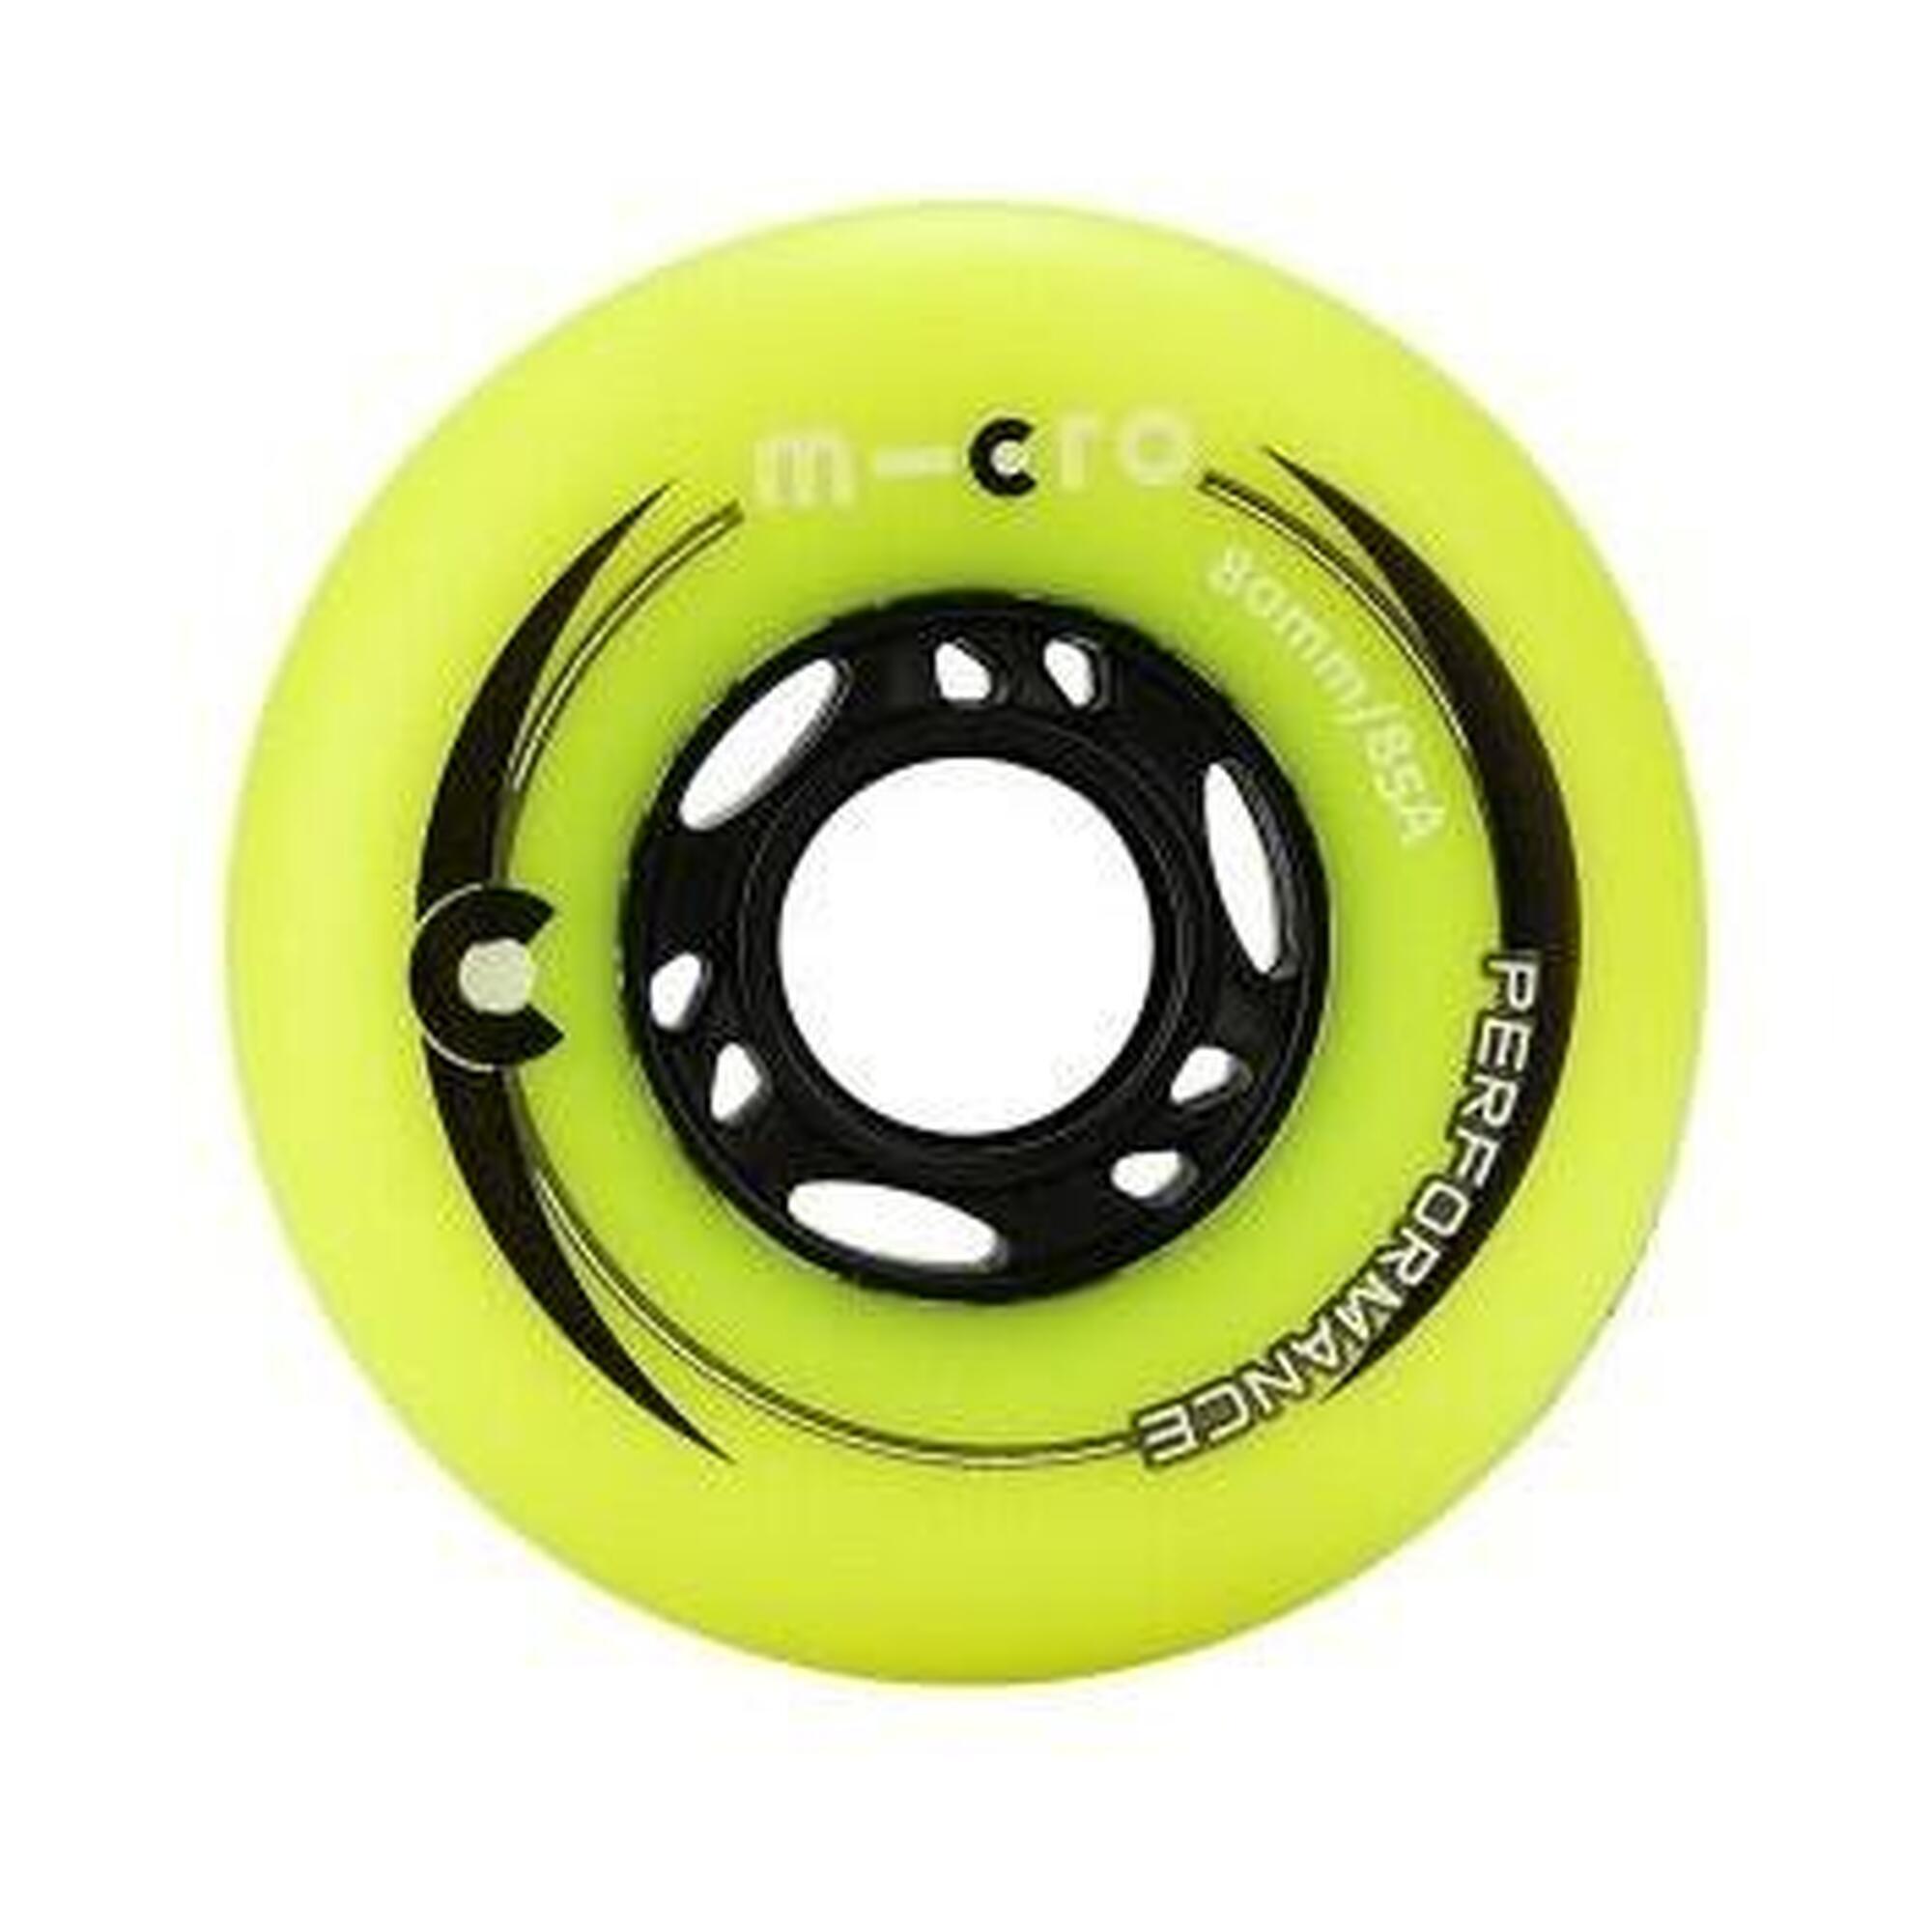 MICRO SKATE PERFORMANCE WHEELS - 76MM/85A YELLOW 4 PACK 76 MM